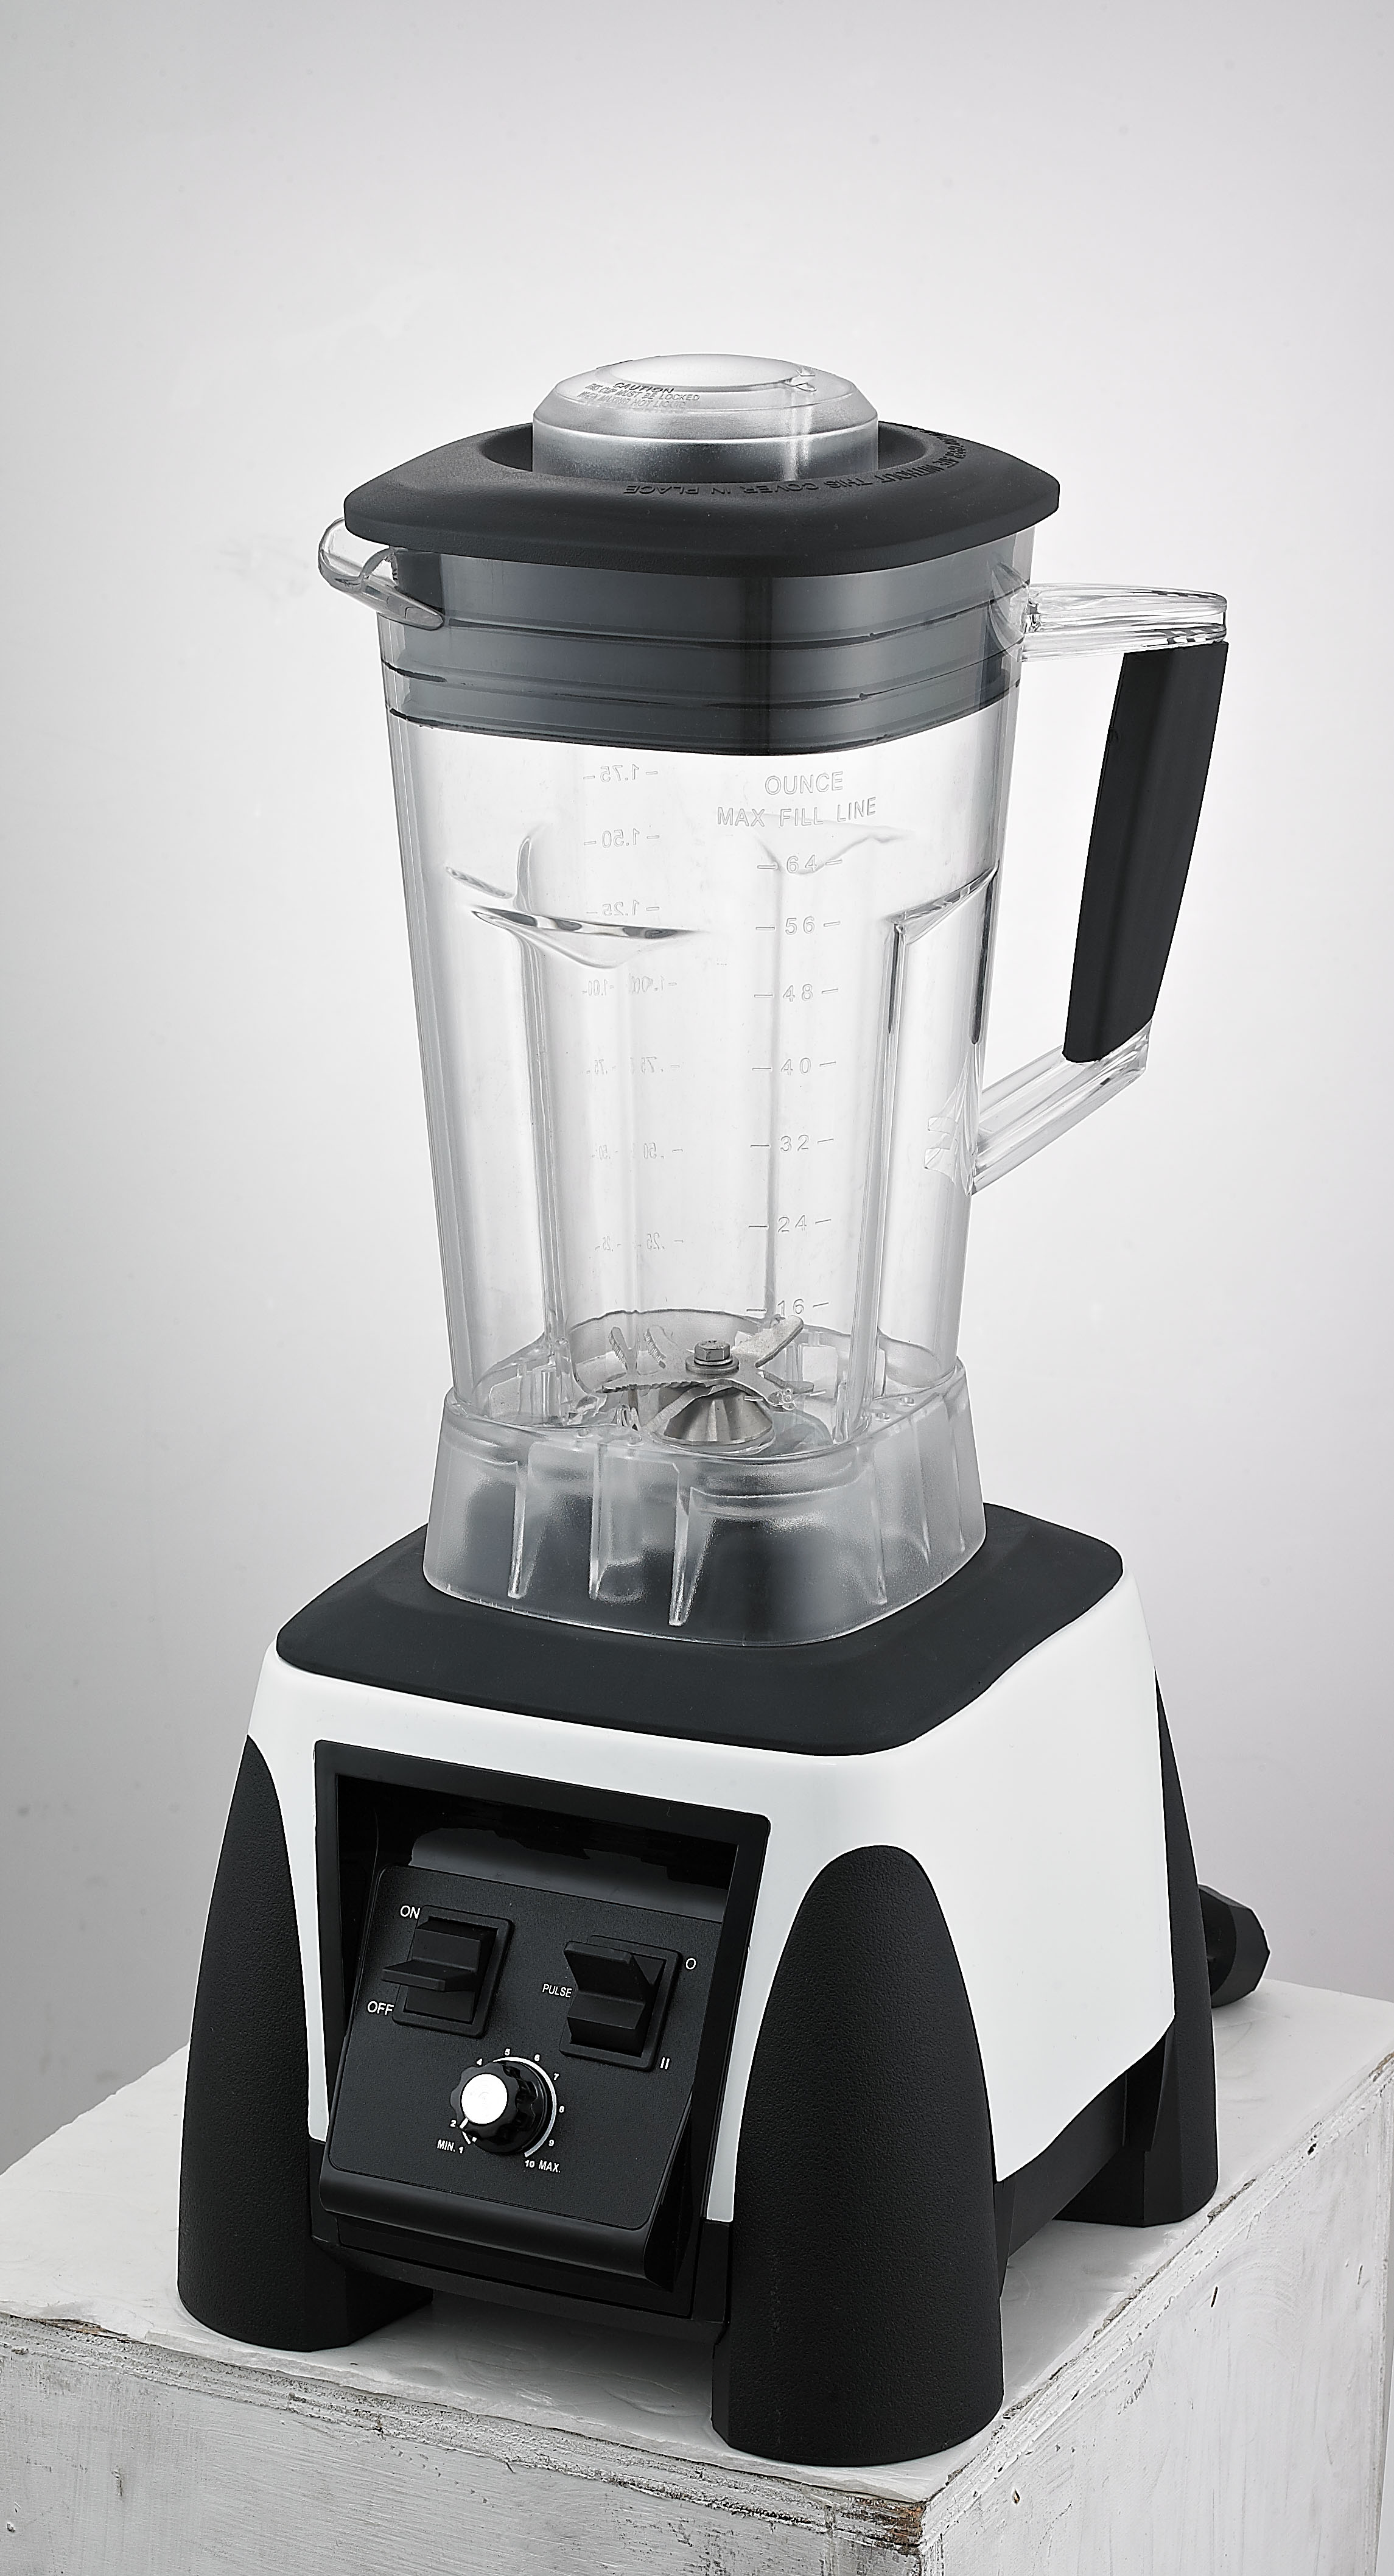 Ice Blender Machine Digital 1800W with Sound Insulation Cover Ice Blended  Machine / Ice Cream Maker Kuala Lumpur, KL, Malaysia Supply, Supplier,  Suppliers